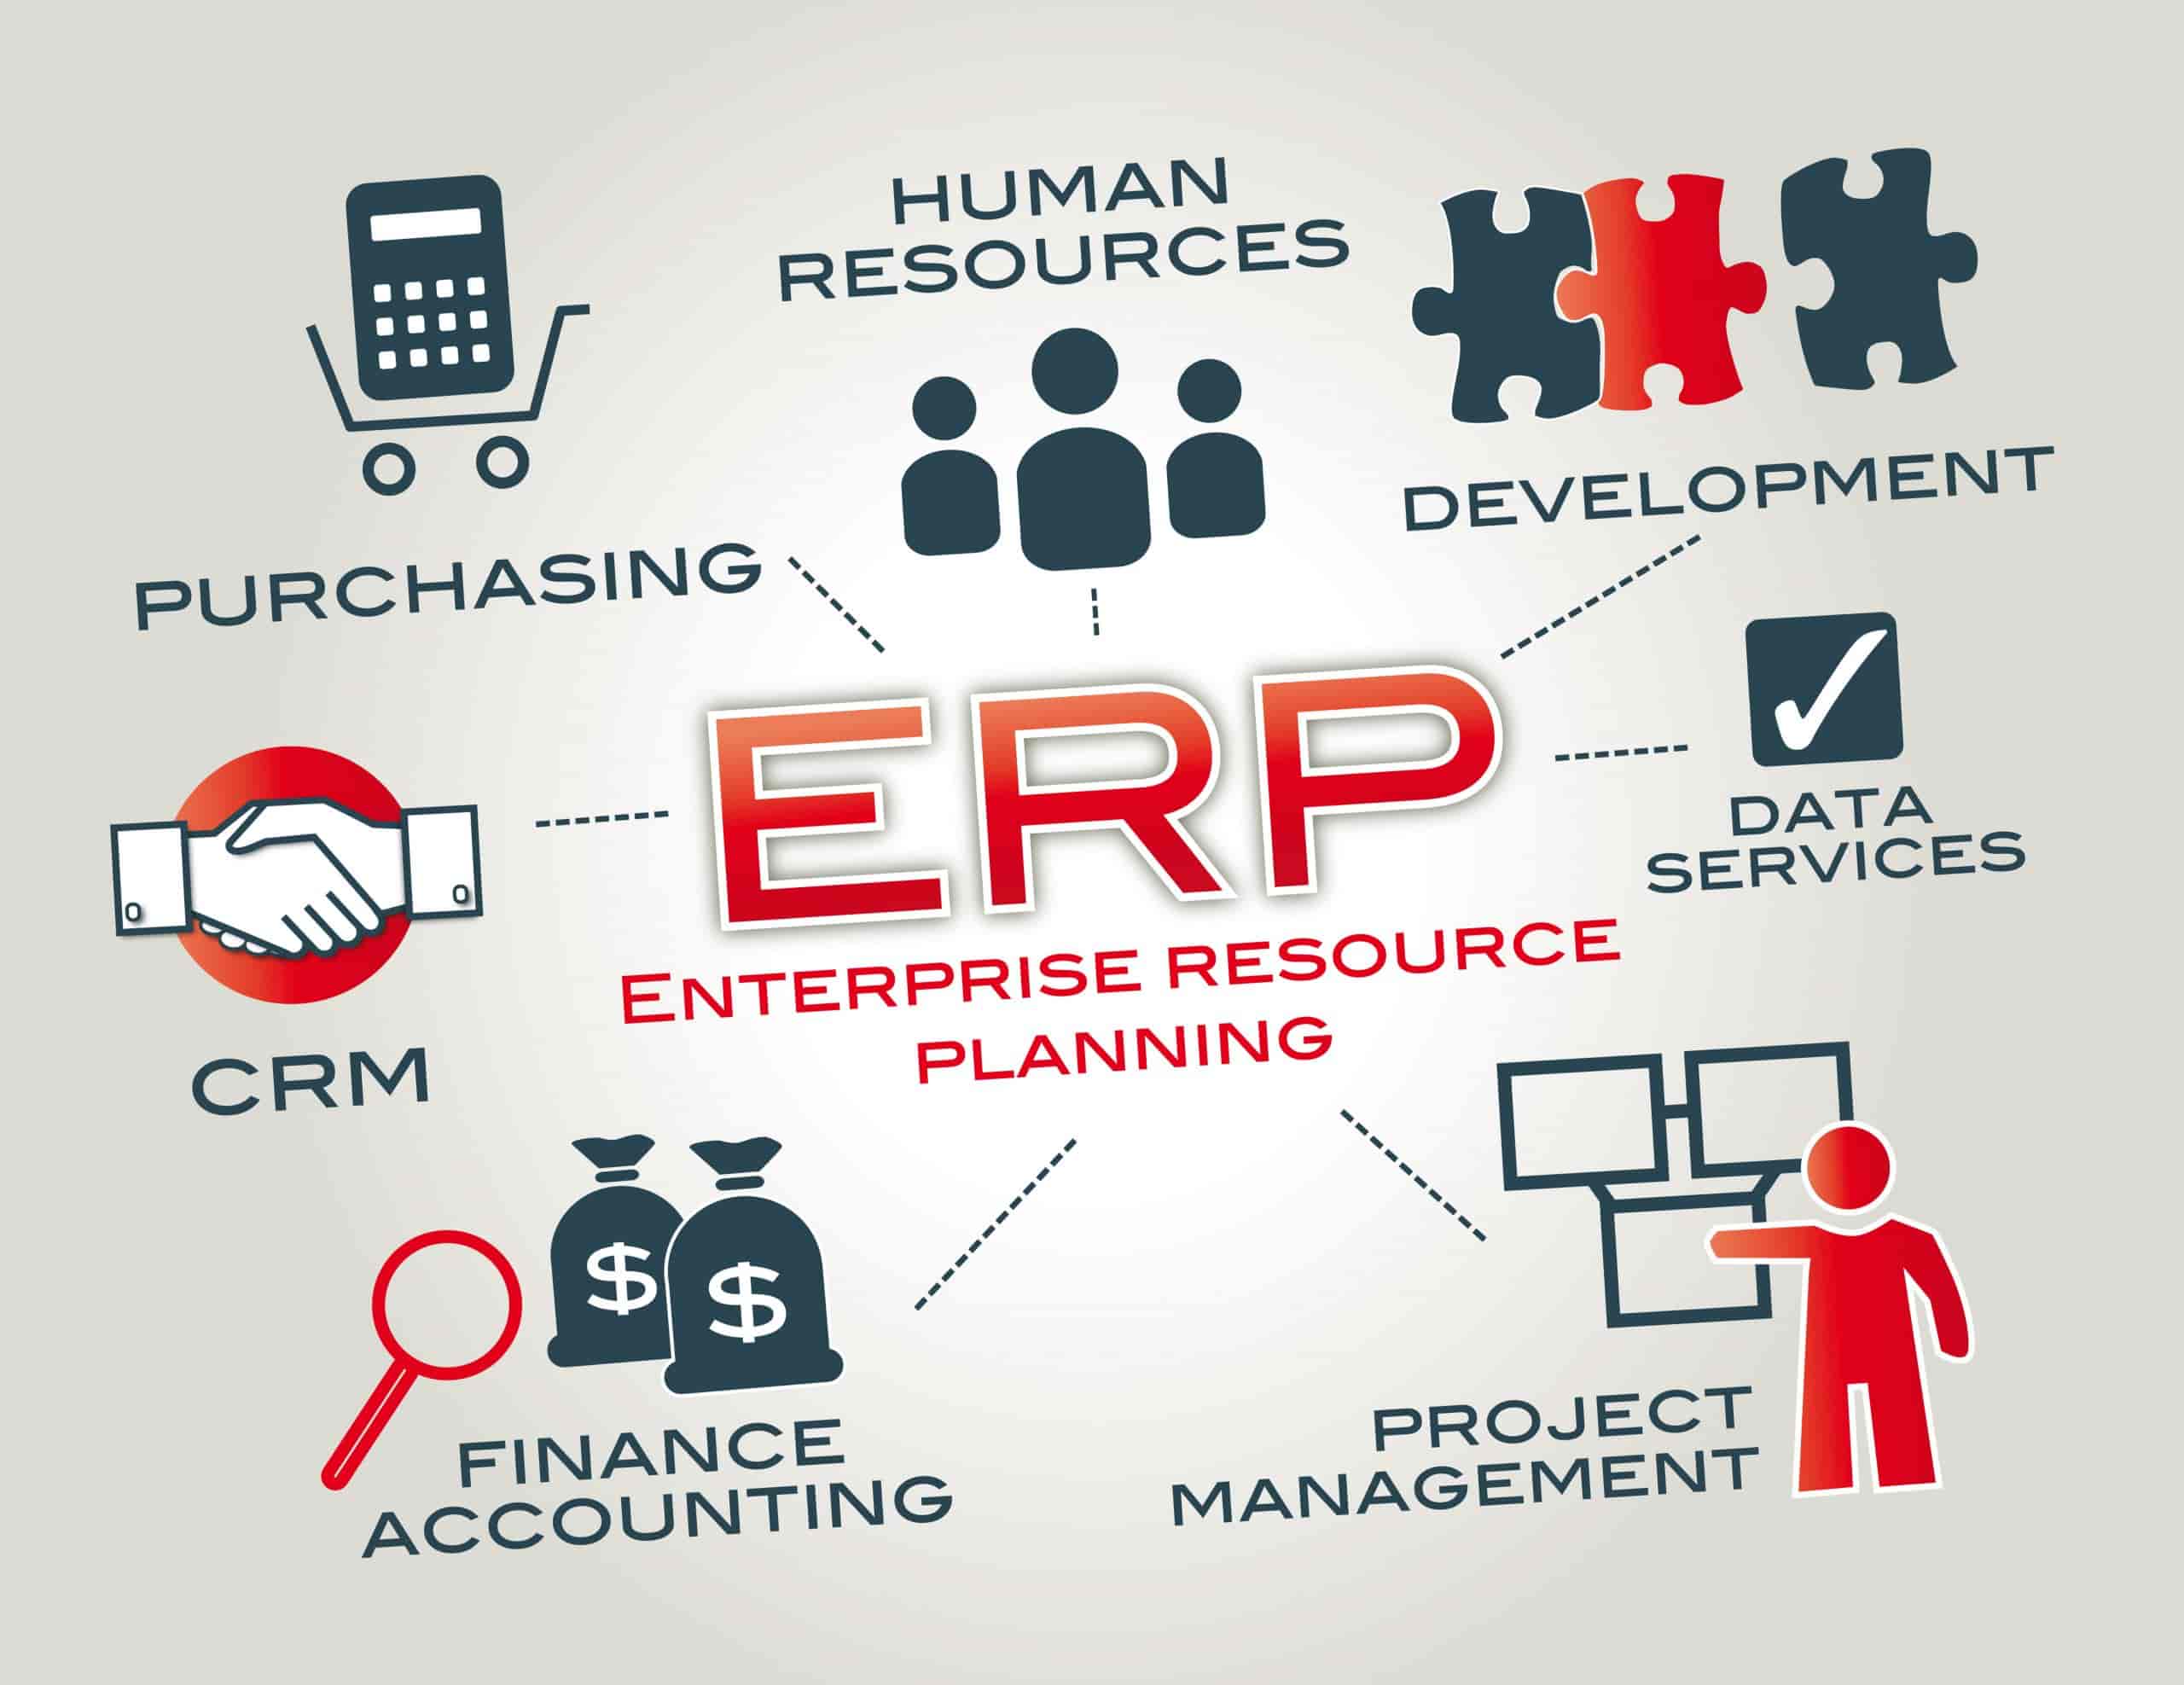 enterprise resource planning meaning in business